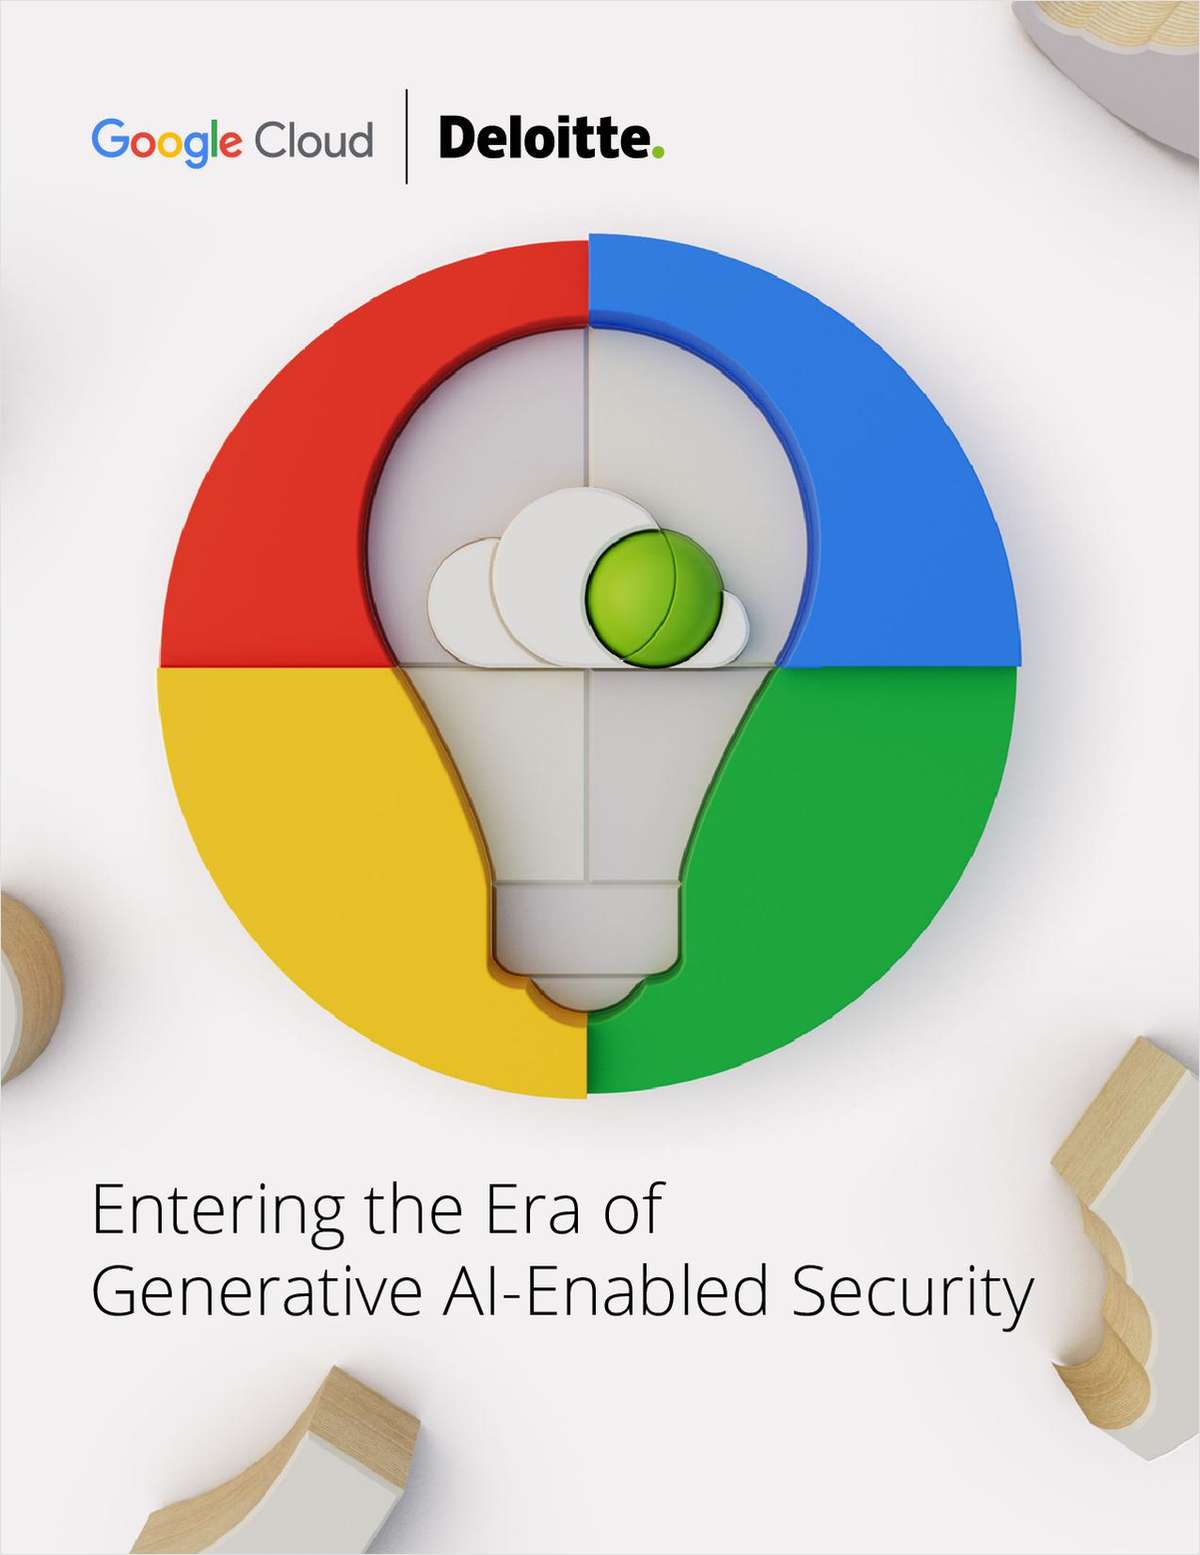 The Era of generative AI-enabled Security